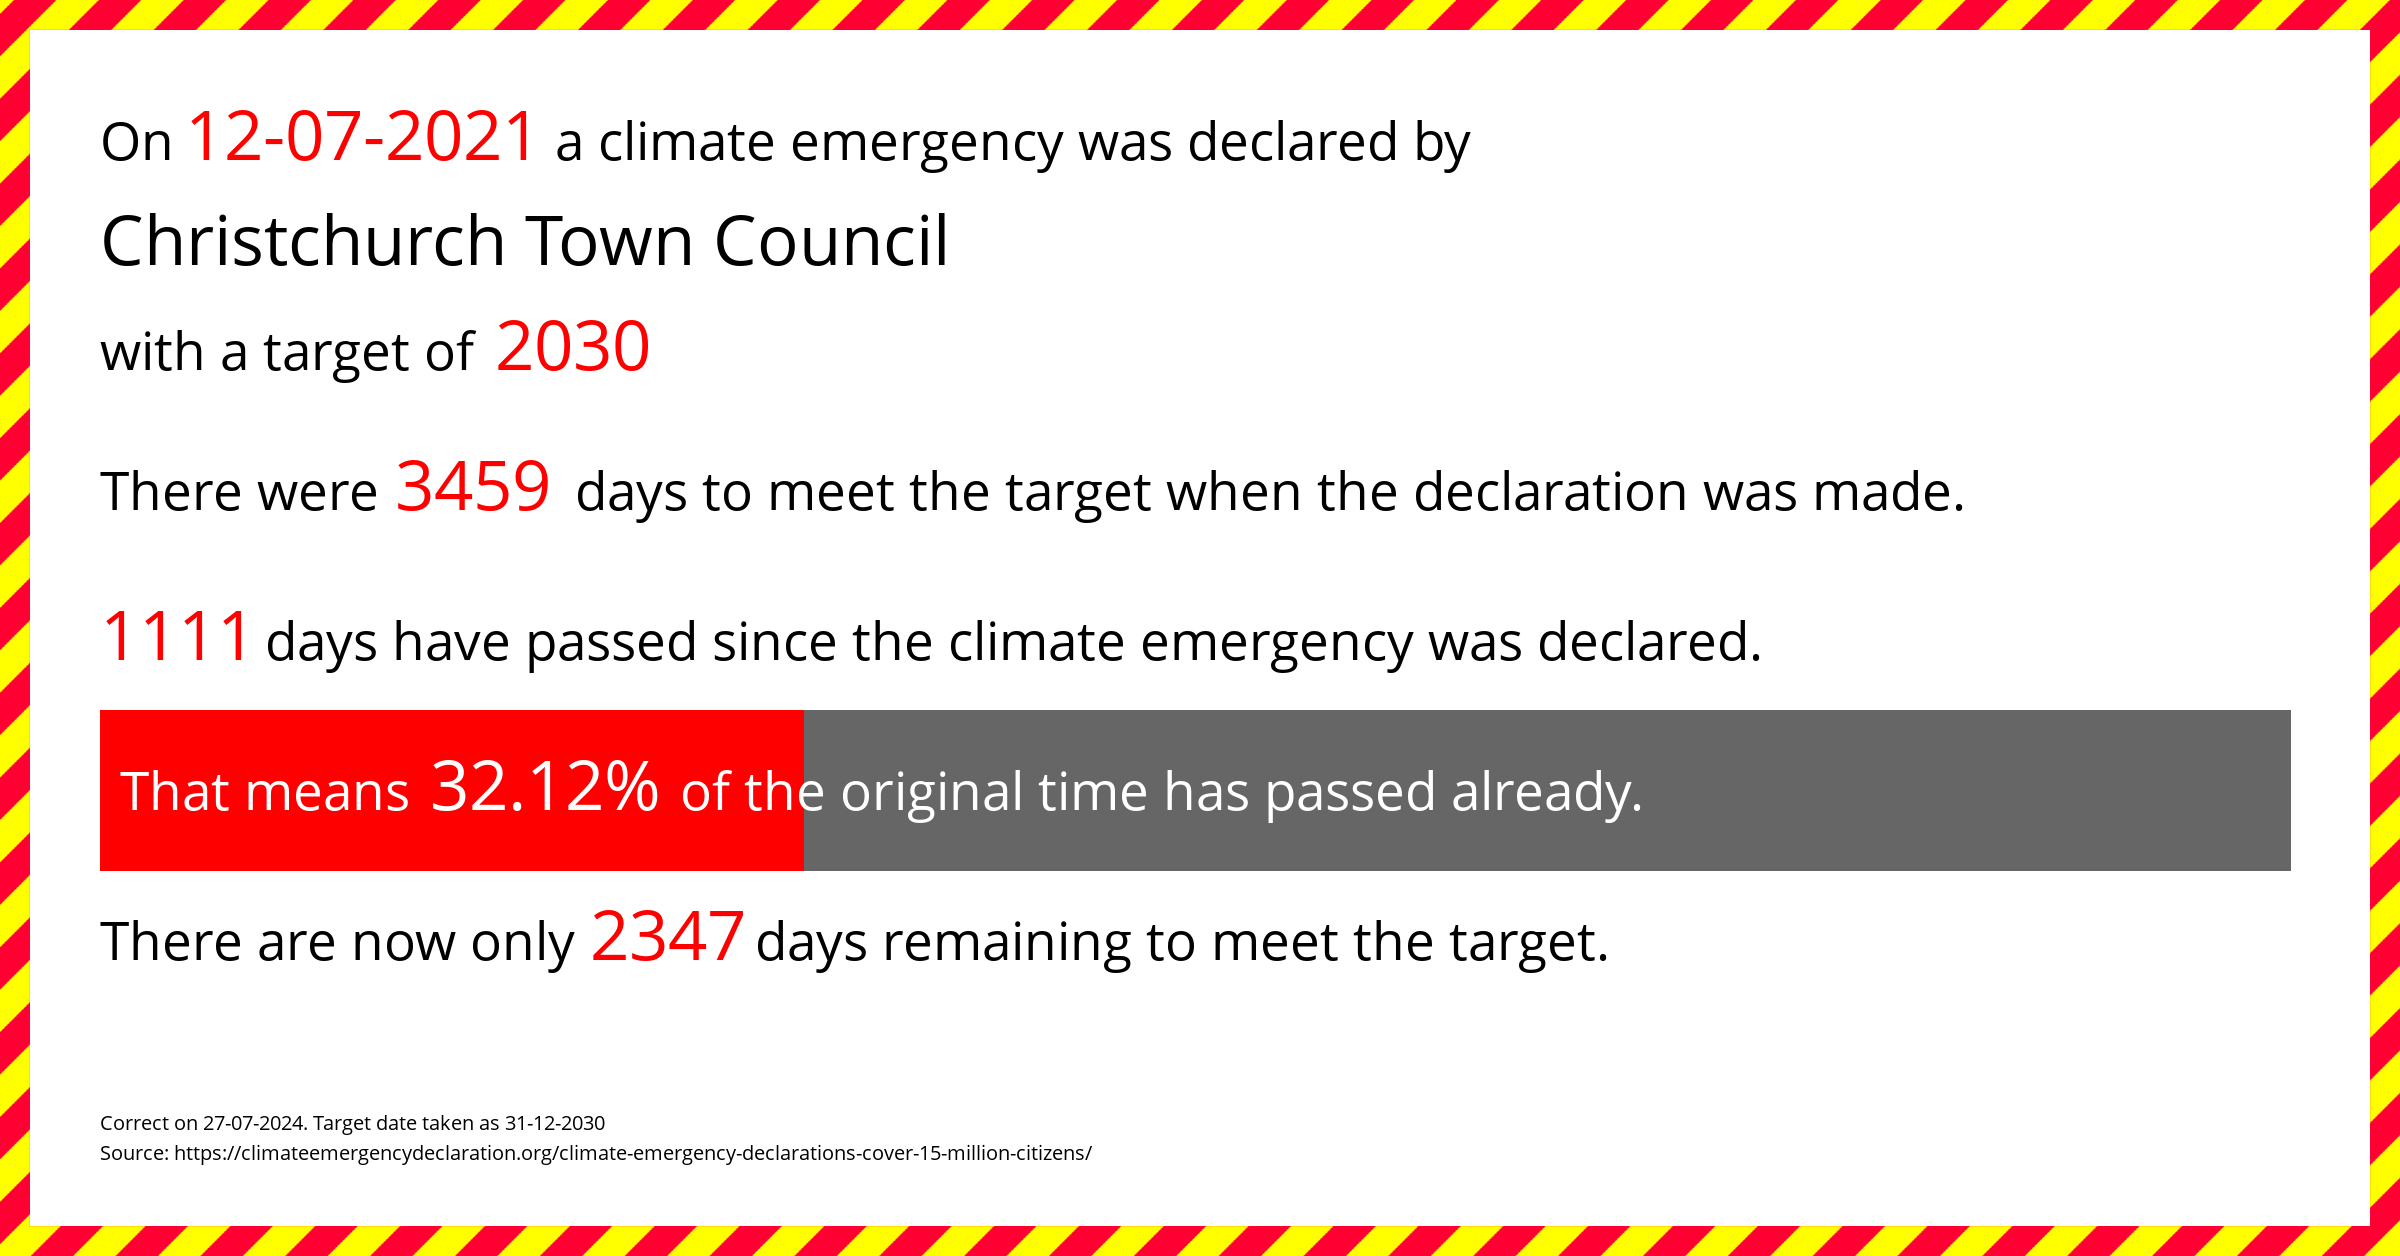 Christchurch Town Council  declared a Climate emergency on Monday 12th July 2021, with a target of 2030.